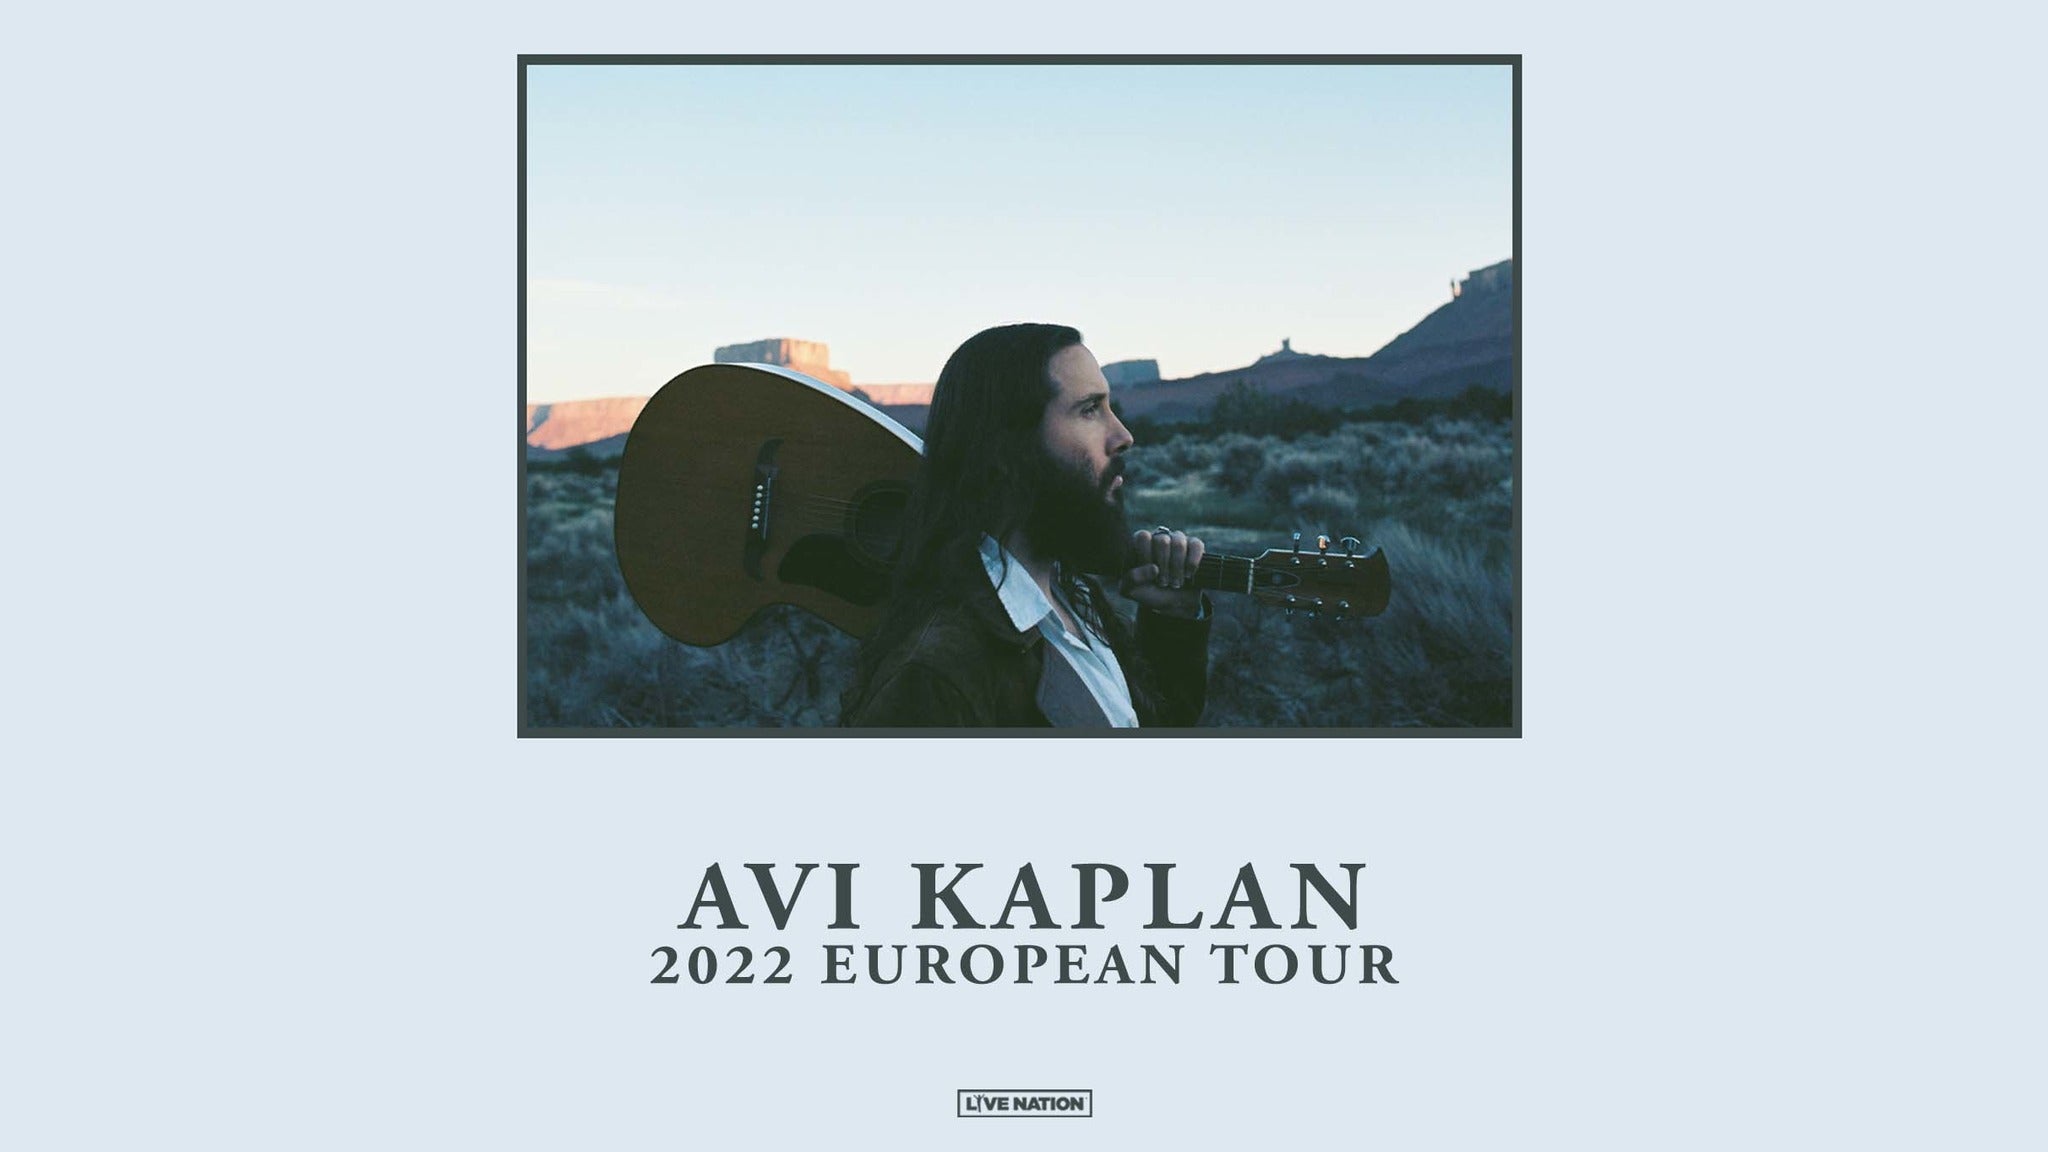 Avi Kaplan - Floating on a Dream Tour at The Crocodile